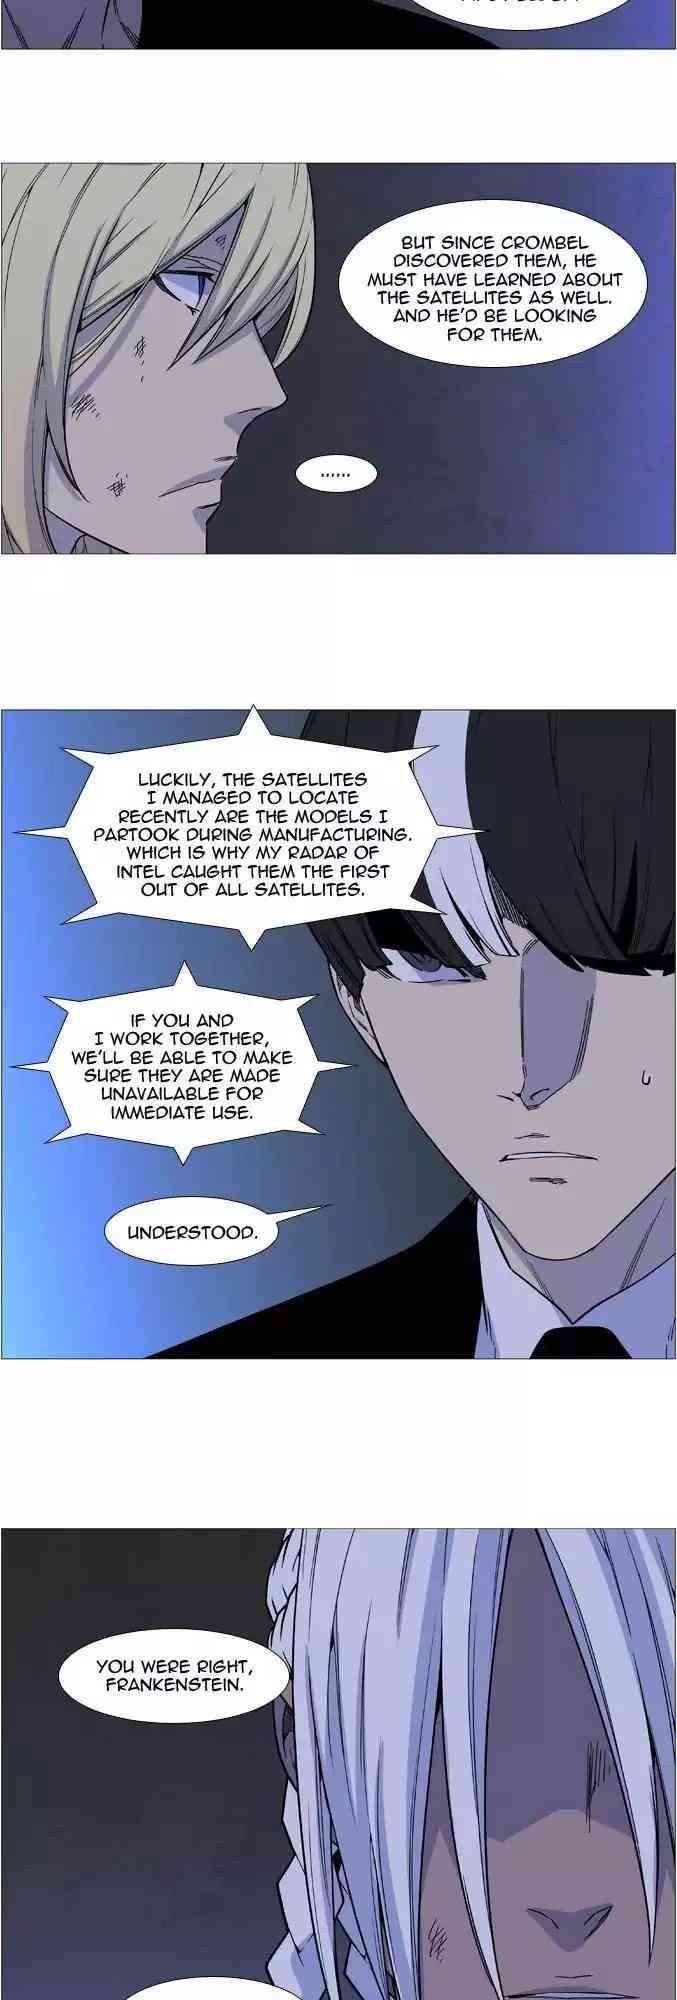 Noblesse Chapter 525_ Ep.524 page 6